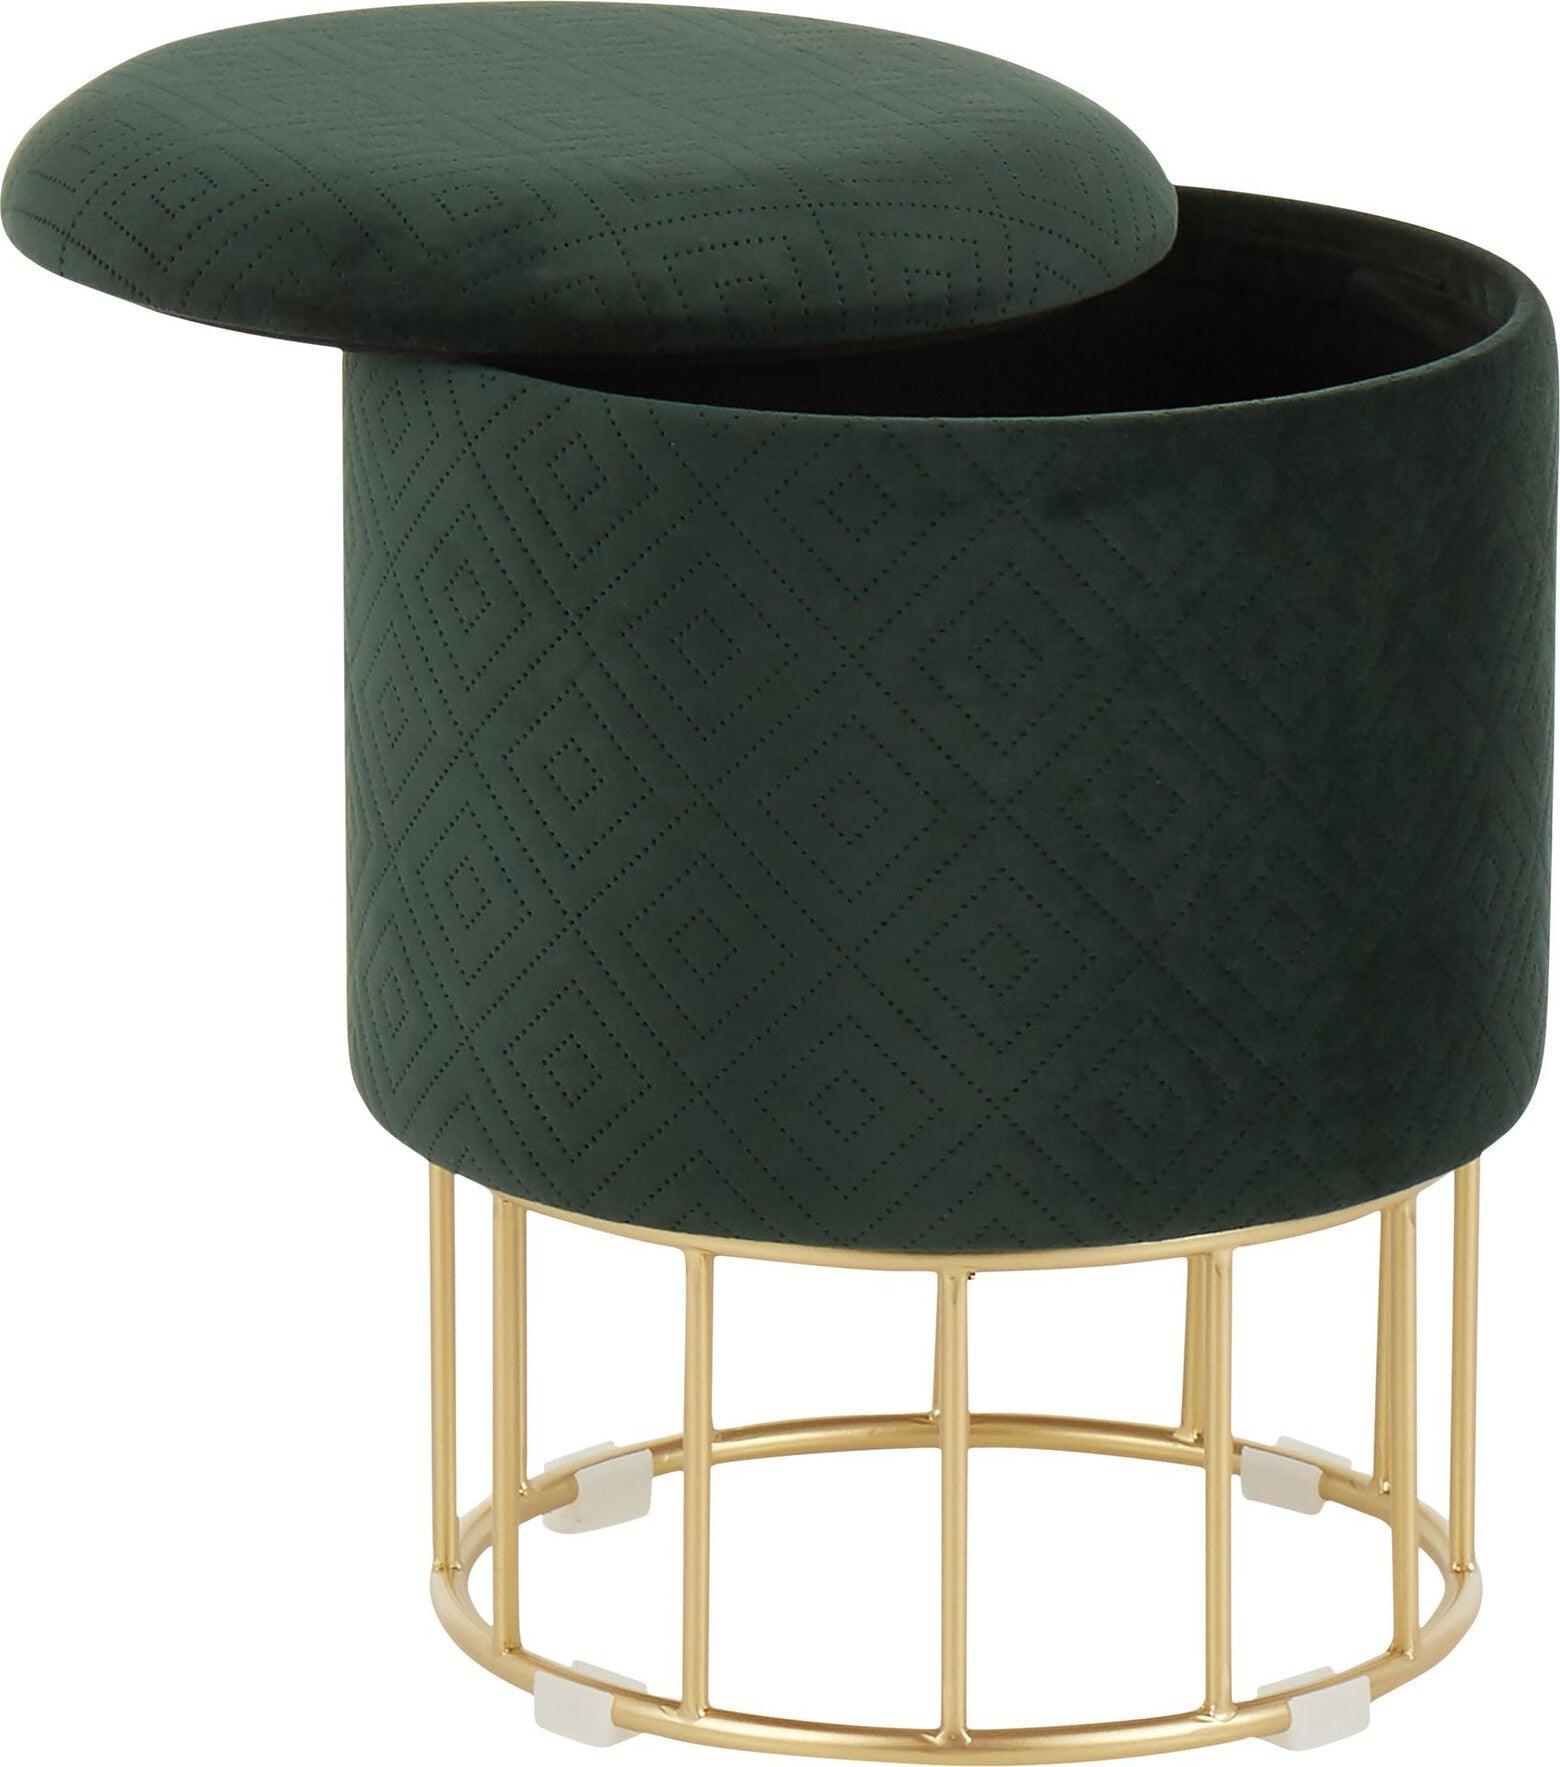 Lumisource Ottomans & Stools - Canary Contemporary Ottoman Gold Metal & Green Velvet